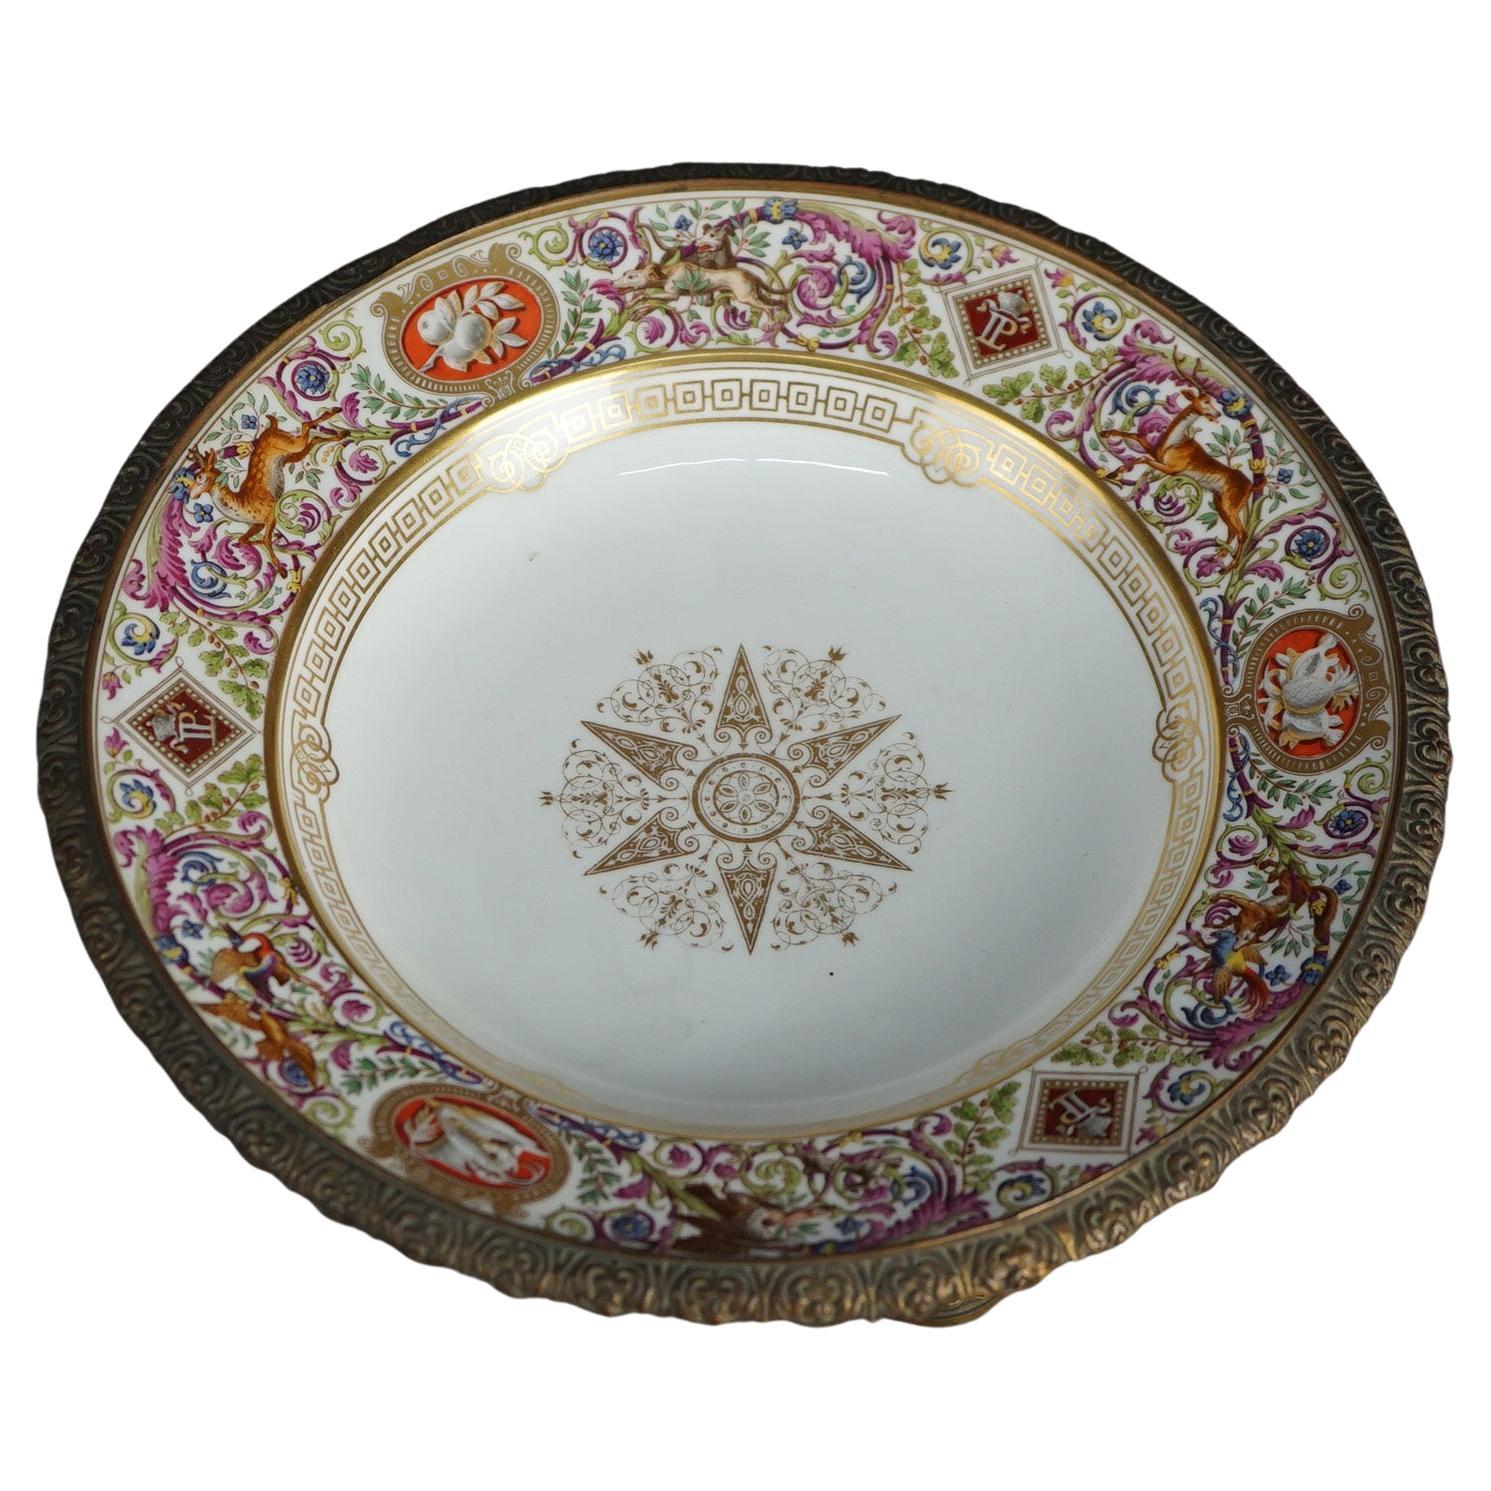 Antique French Sevrés charger offers gilt decorated porcelain plate with deer and foliate elements on garland form gilt cast bronze base, maker mark en verso as photographed, c1890

Measures- 5.5''H x 10''W x 10''D